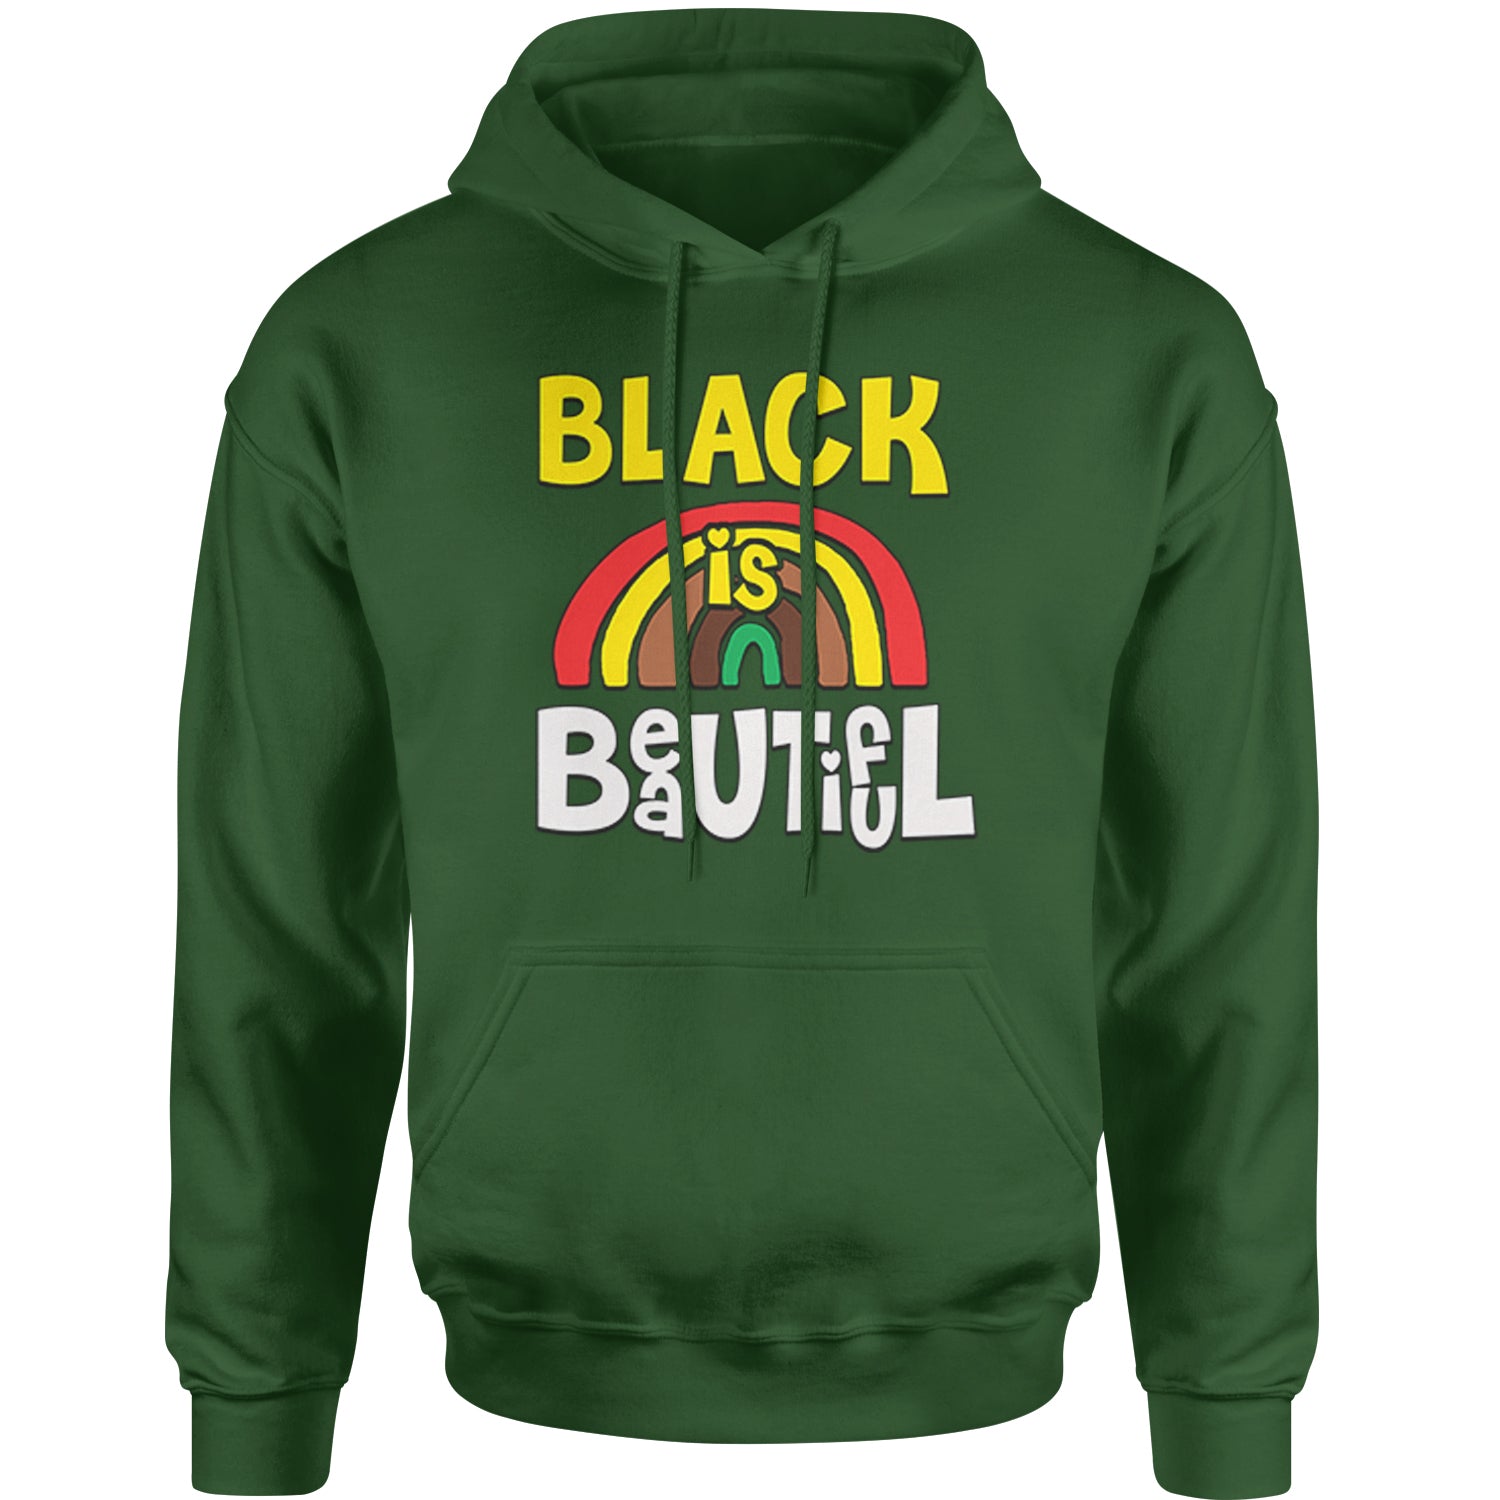 Black Is Beautiful Rainbow Adult Hoodie Sweatshirt african, africanamerican, american, black, blackpride, blm, harriet, king, lives, luther, malcolm, march, martin, matter, parks, protest, rosa, tubman, x by Expression Tees